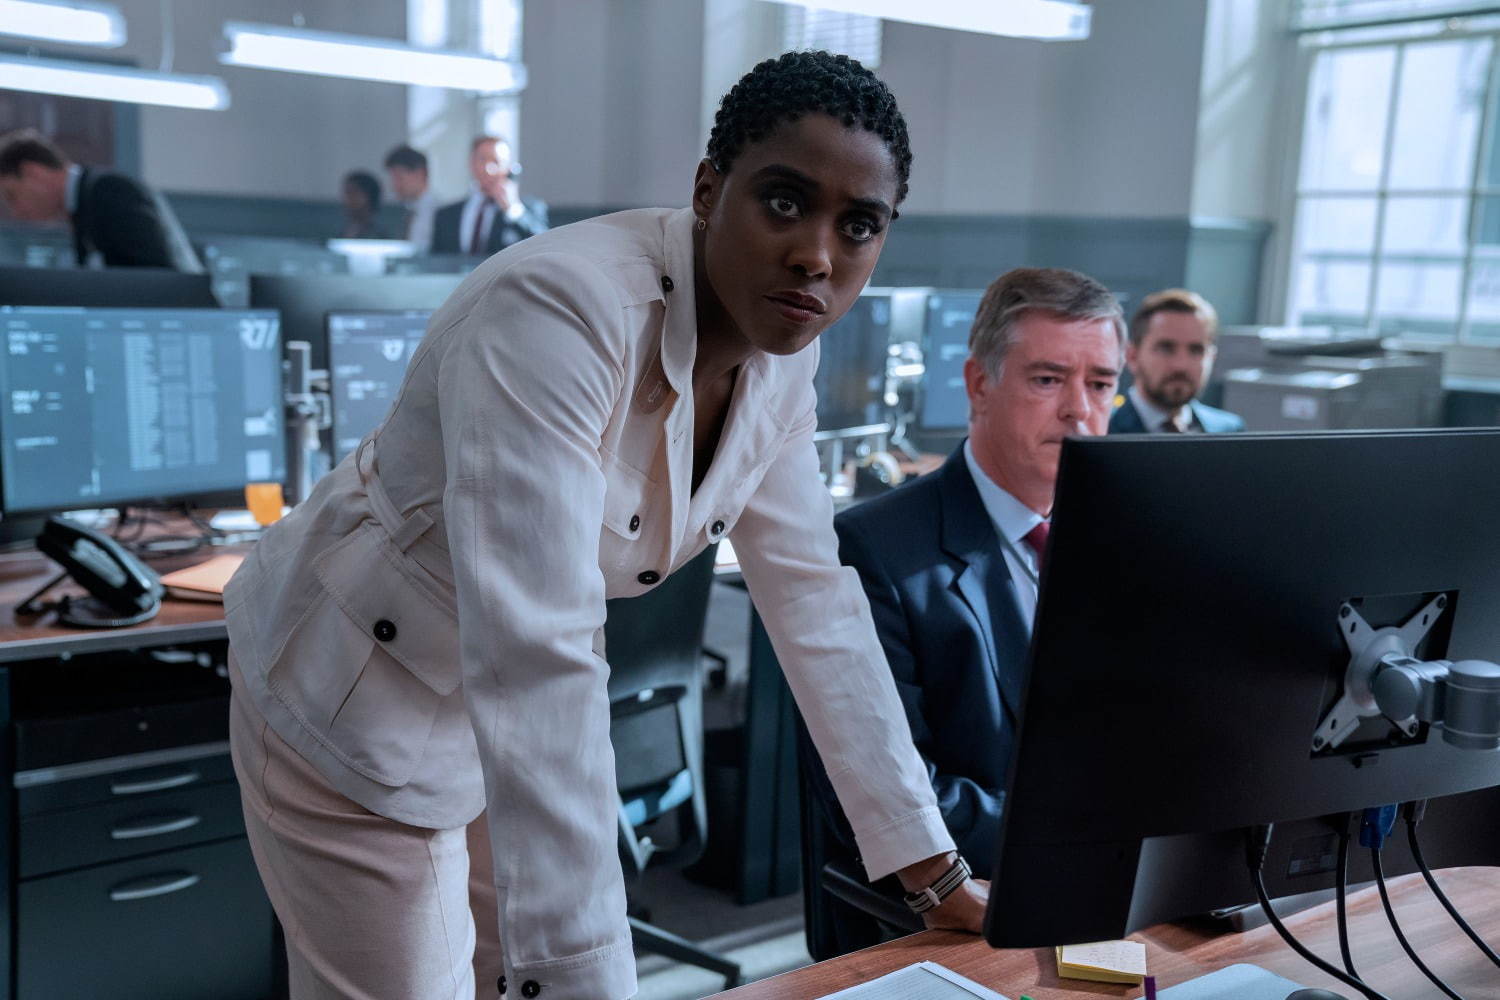 Nomi (Lashana Lynch) in NO TIME TO DIE, an EON Productions and Metro Goldwyn Mayer Studios film
Credit: Nicola Dove © 2020 DANJAQ, LLCAND MGM.ALL RIGHTS RESERVED.